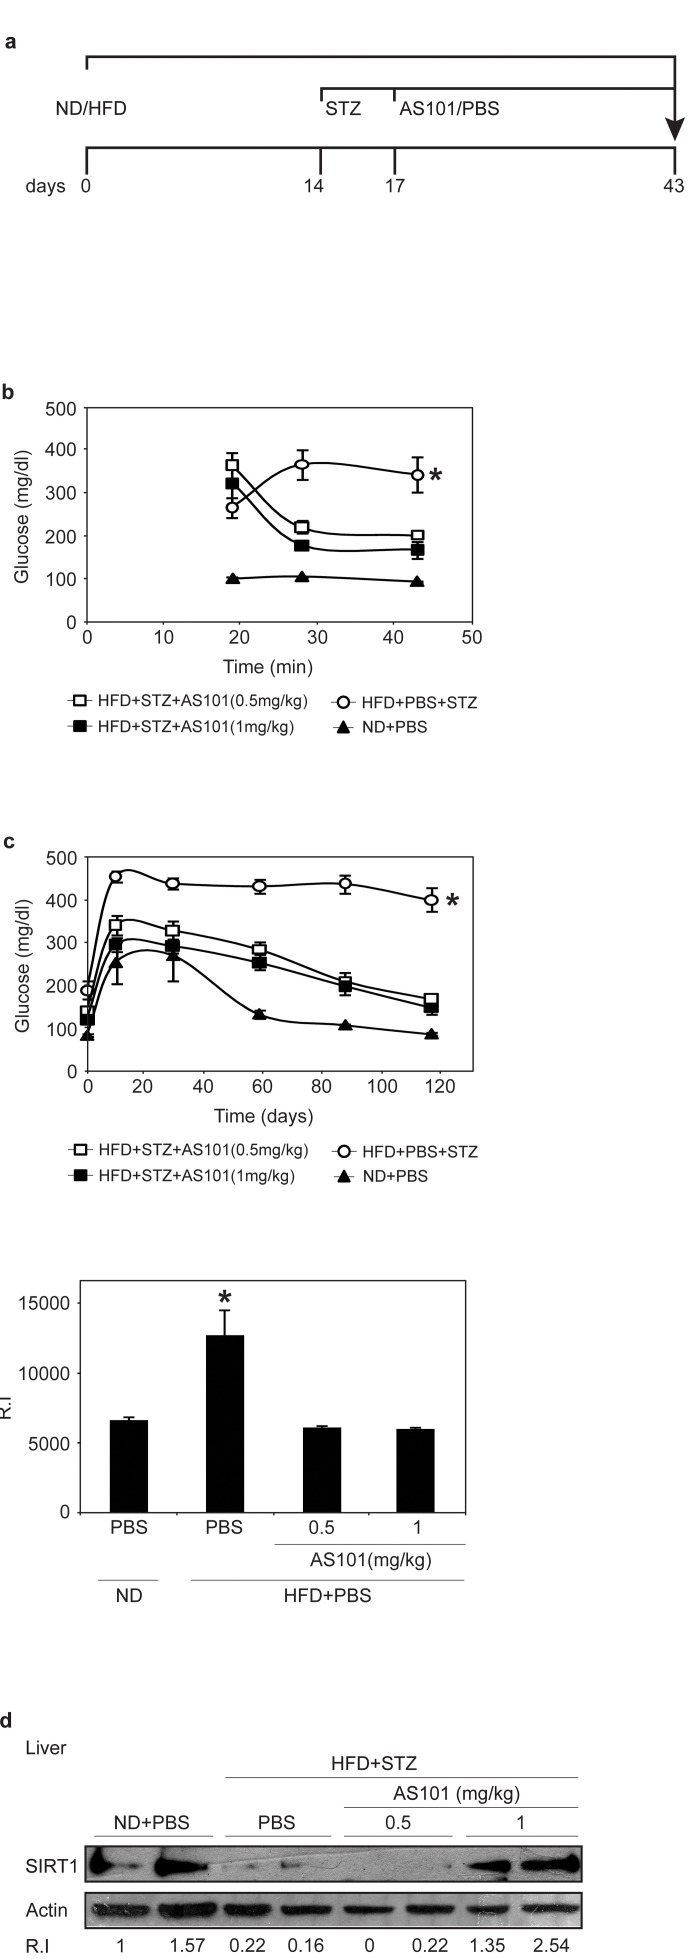 AS101 treatment after disease induction results in partial beneficial effects in the HFD+STZ T2D rat model